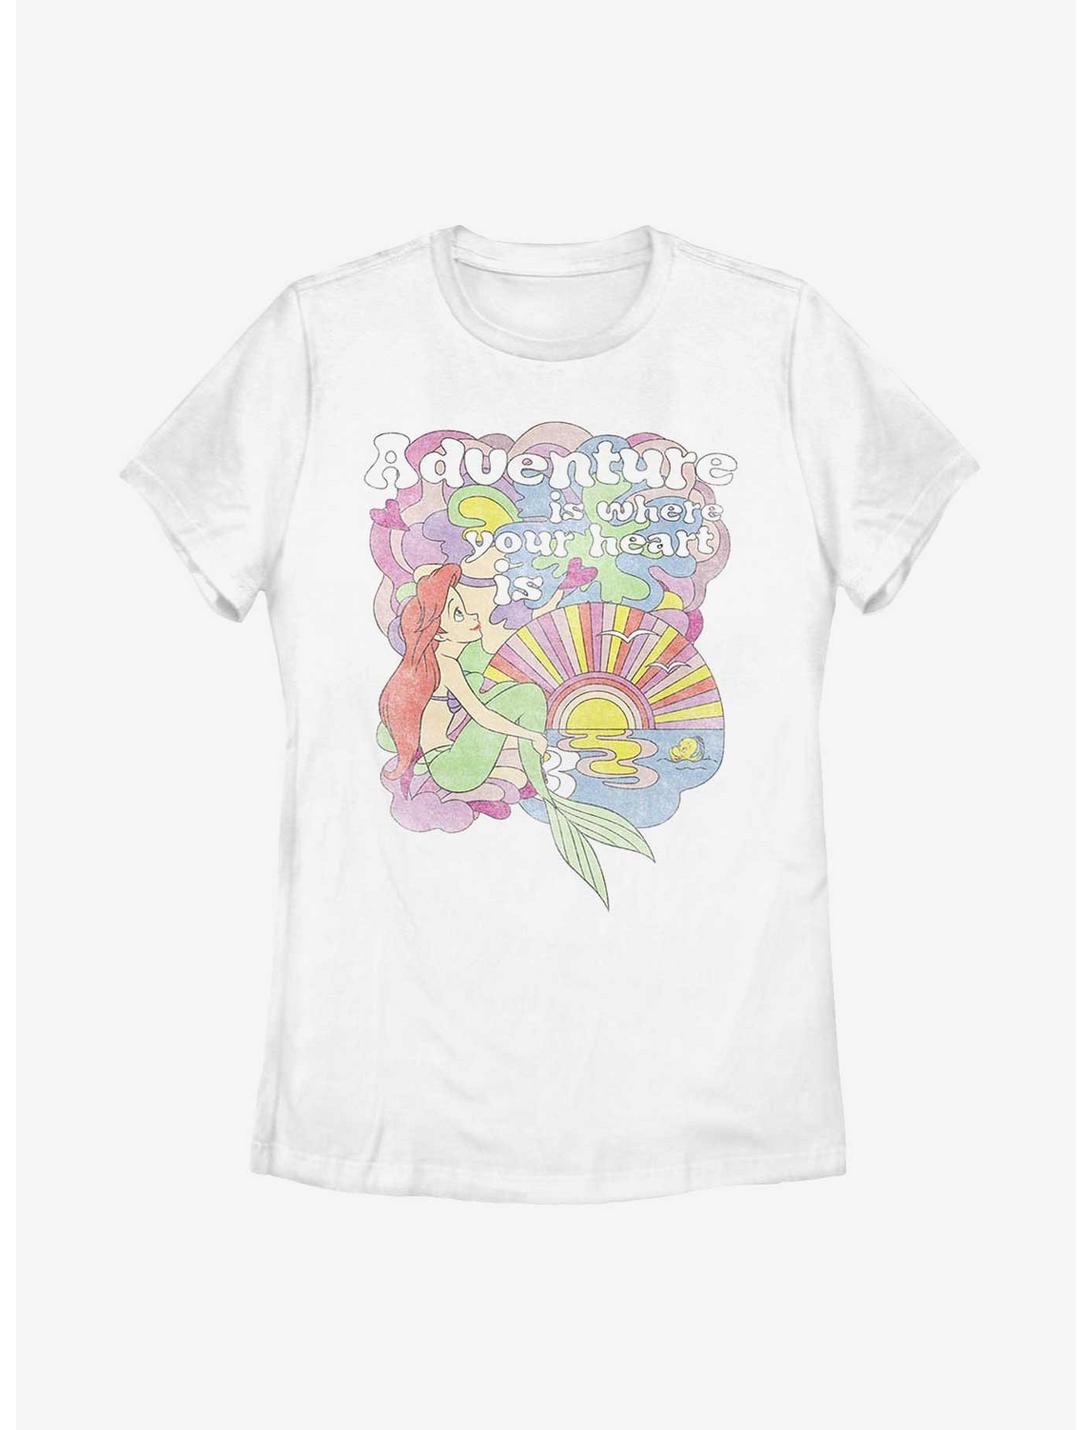 Disney The Little Mermaid Adventure Is Where Your Heart Is Womens T-Shirt, WHITE, hi-res